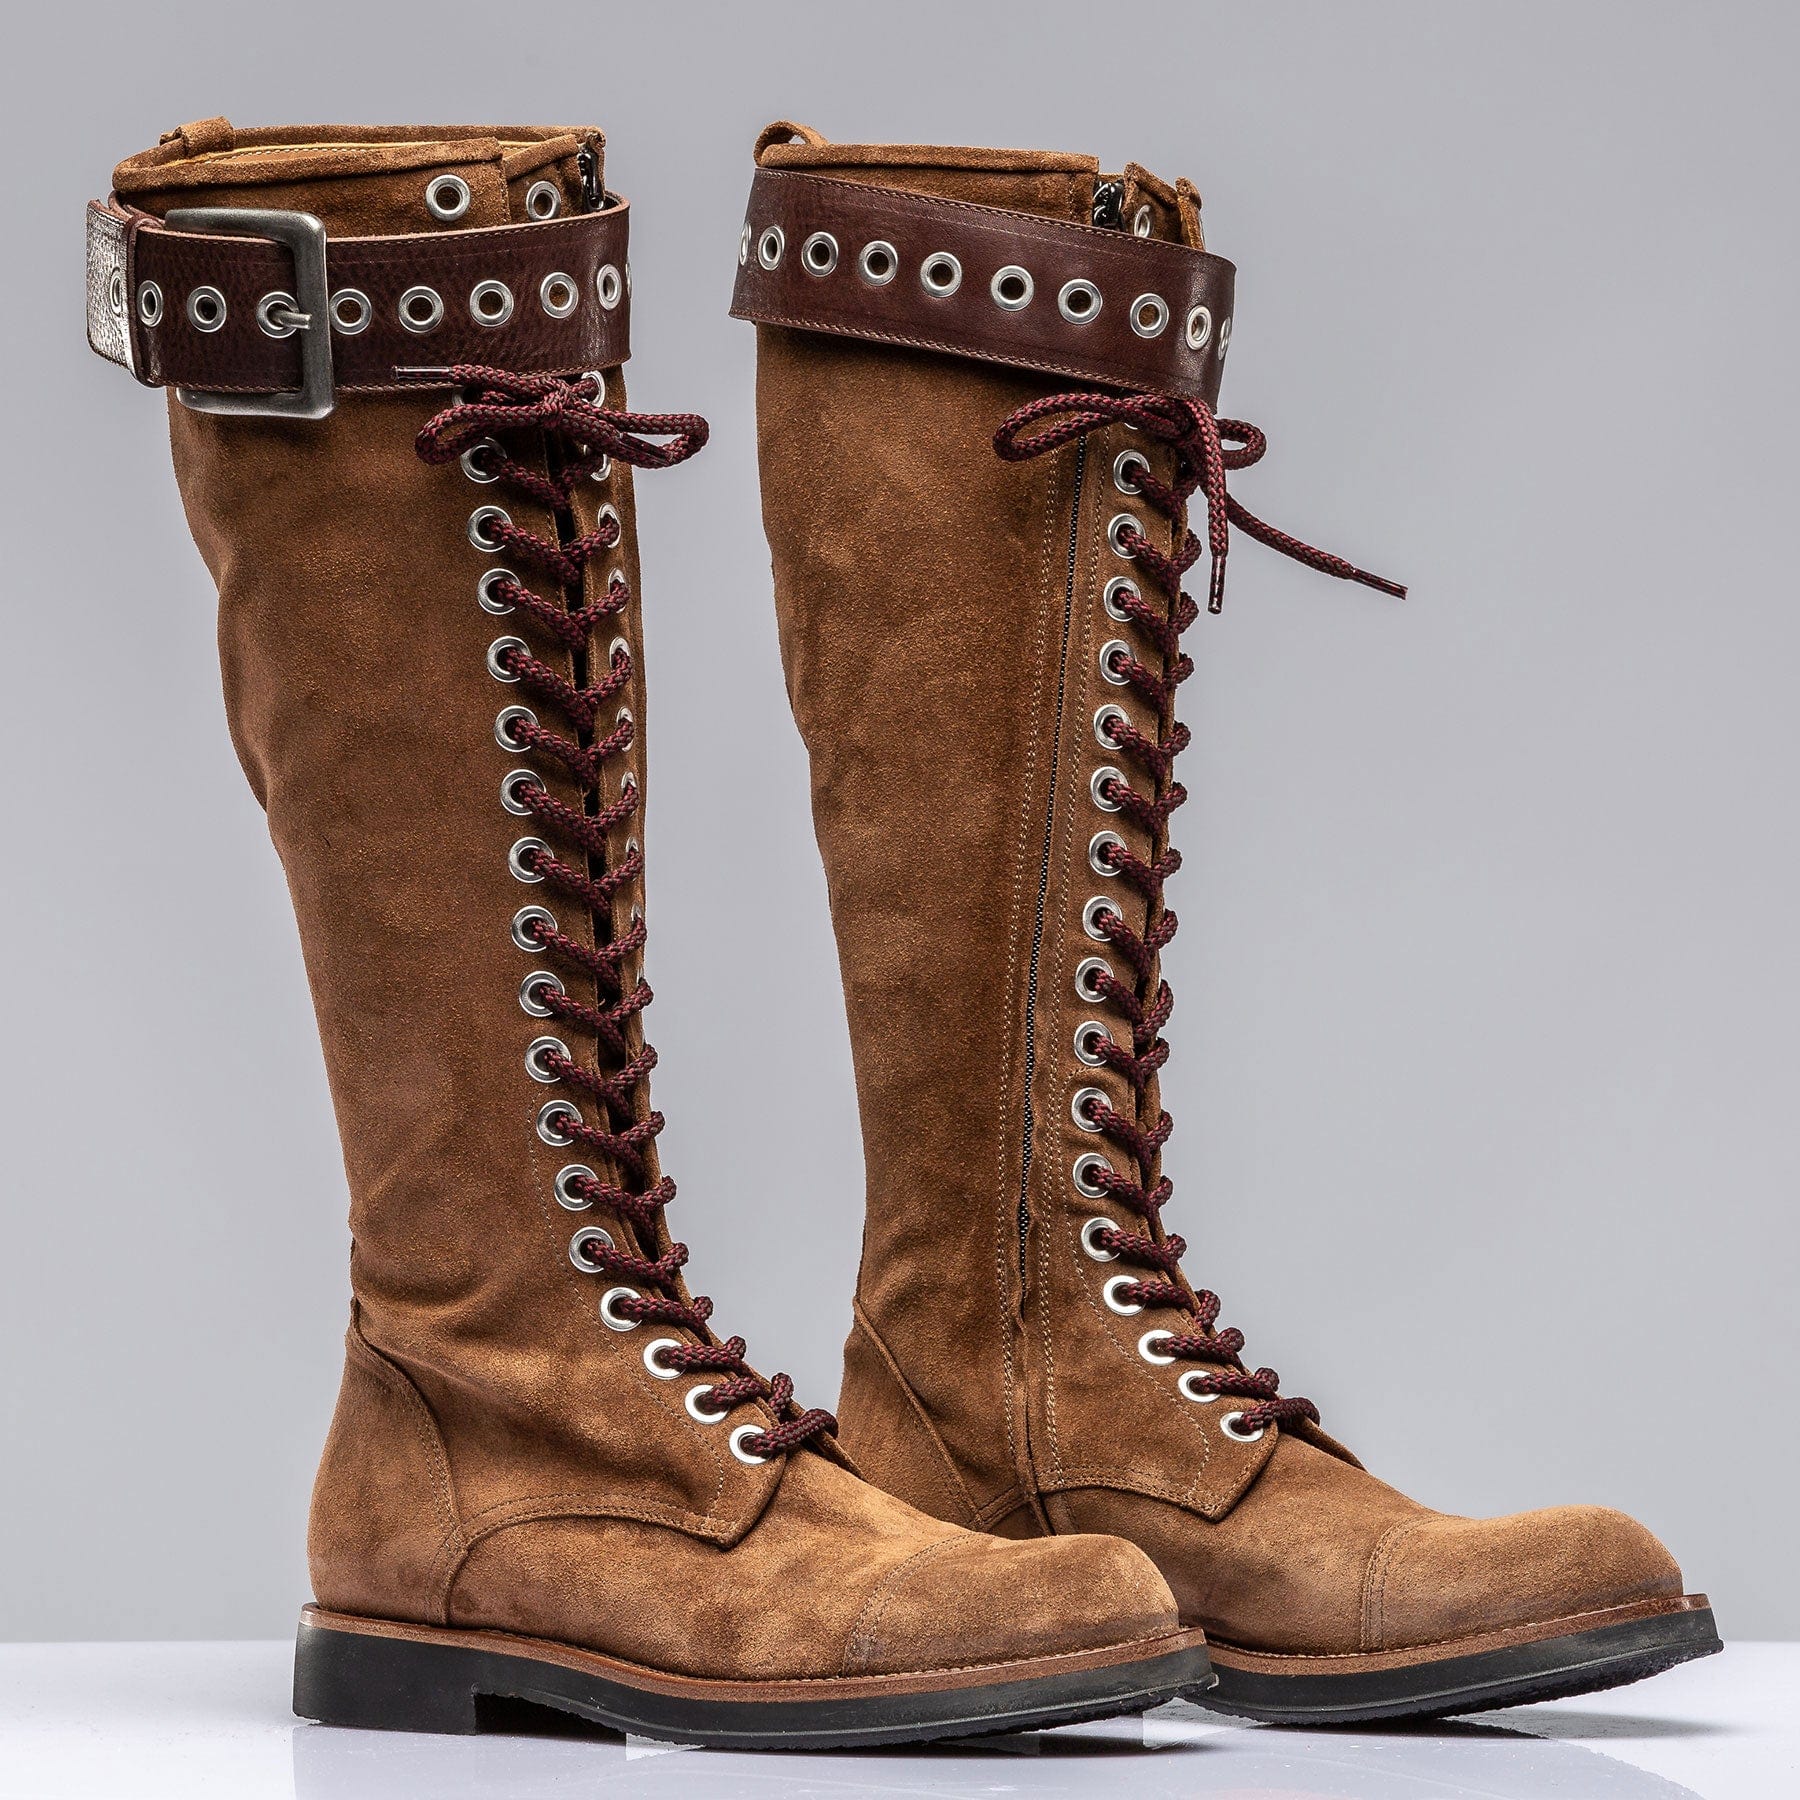 Alps Tall Lace Up Boot W/ Buckle In Cognac Suede